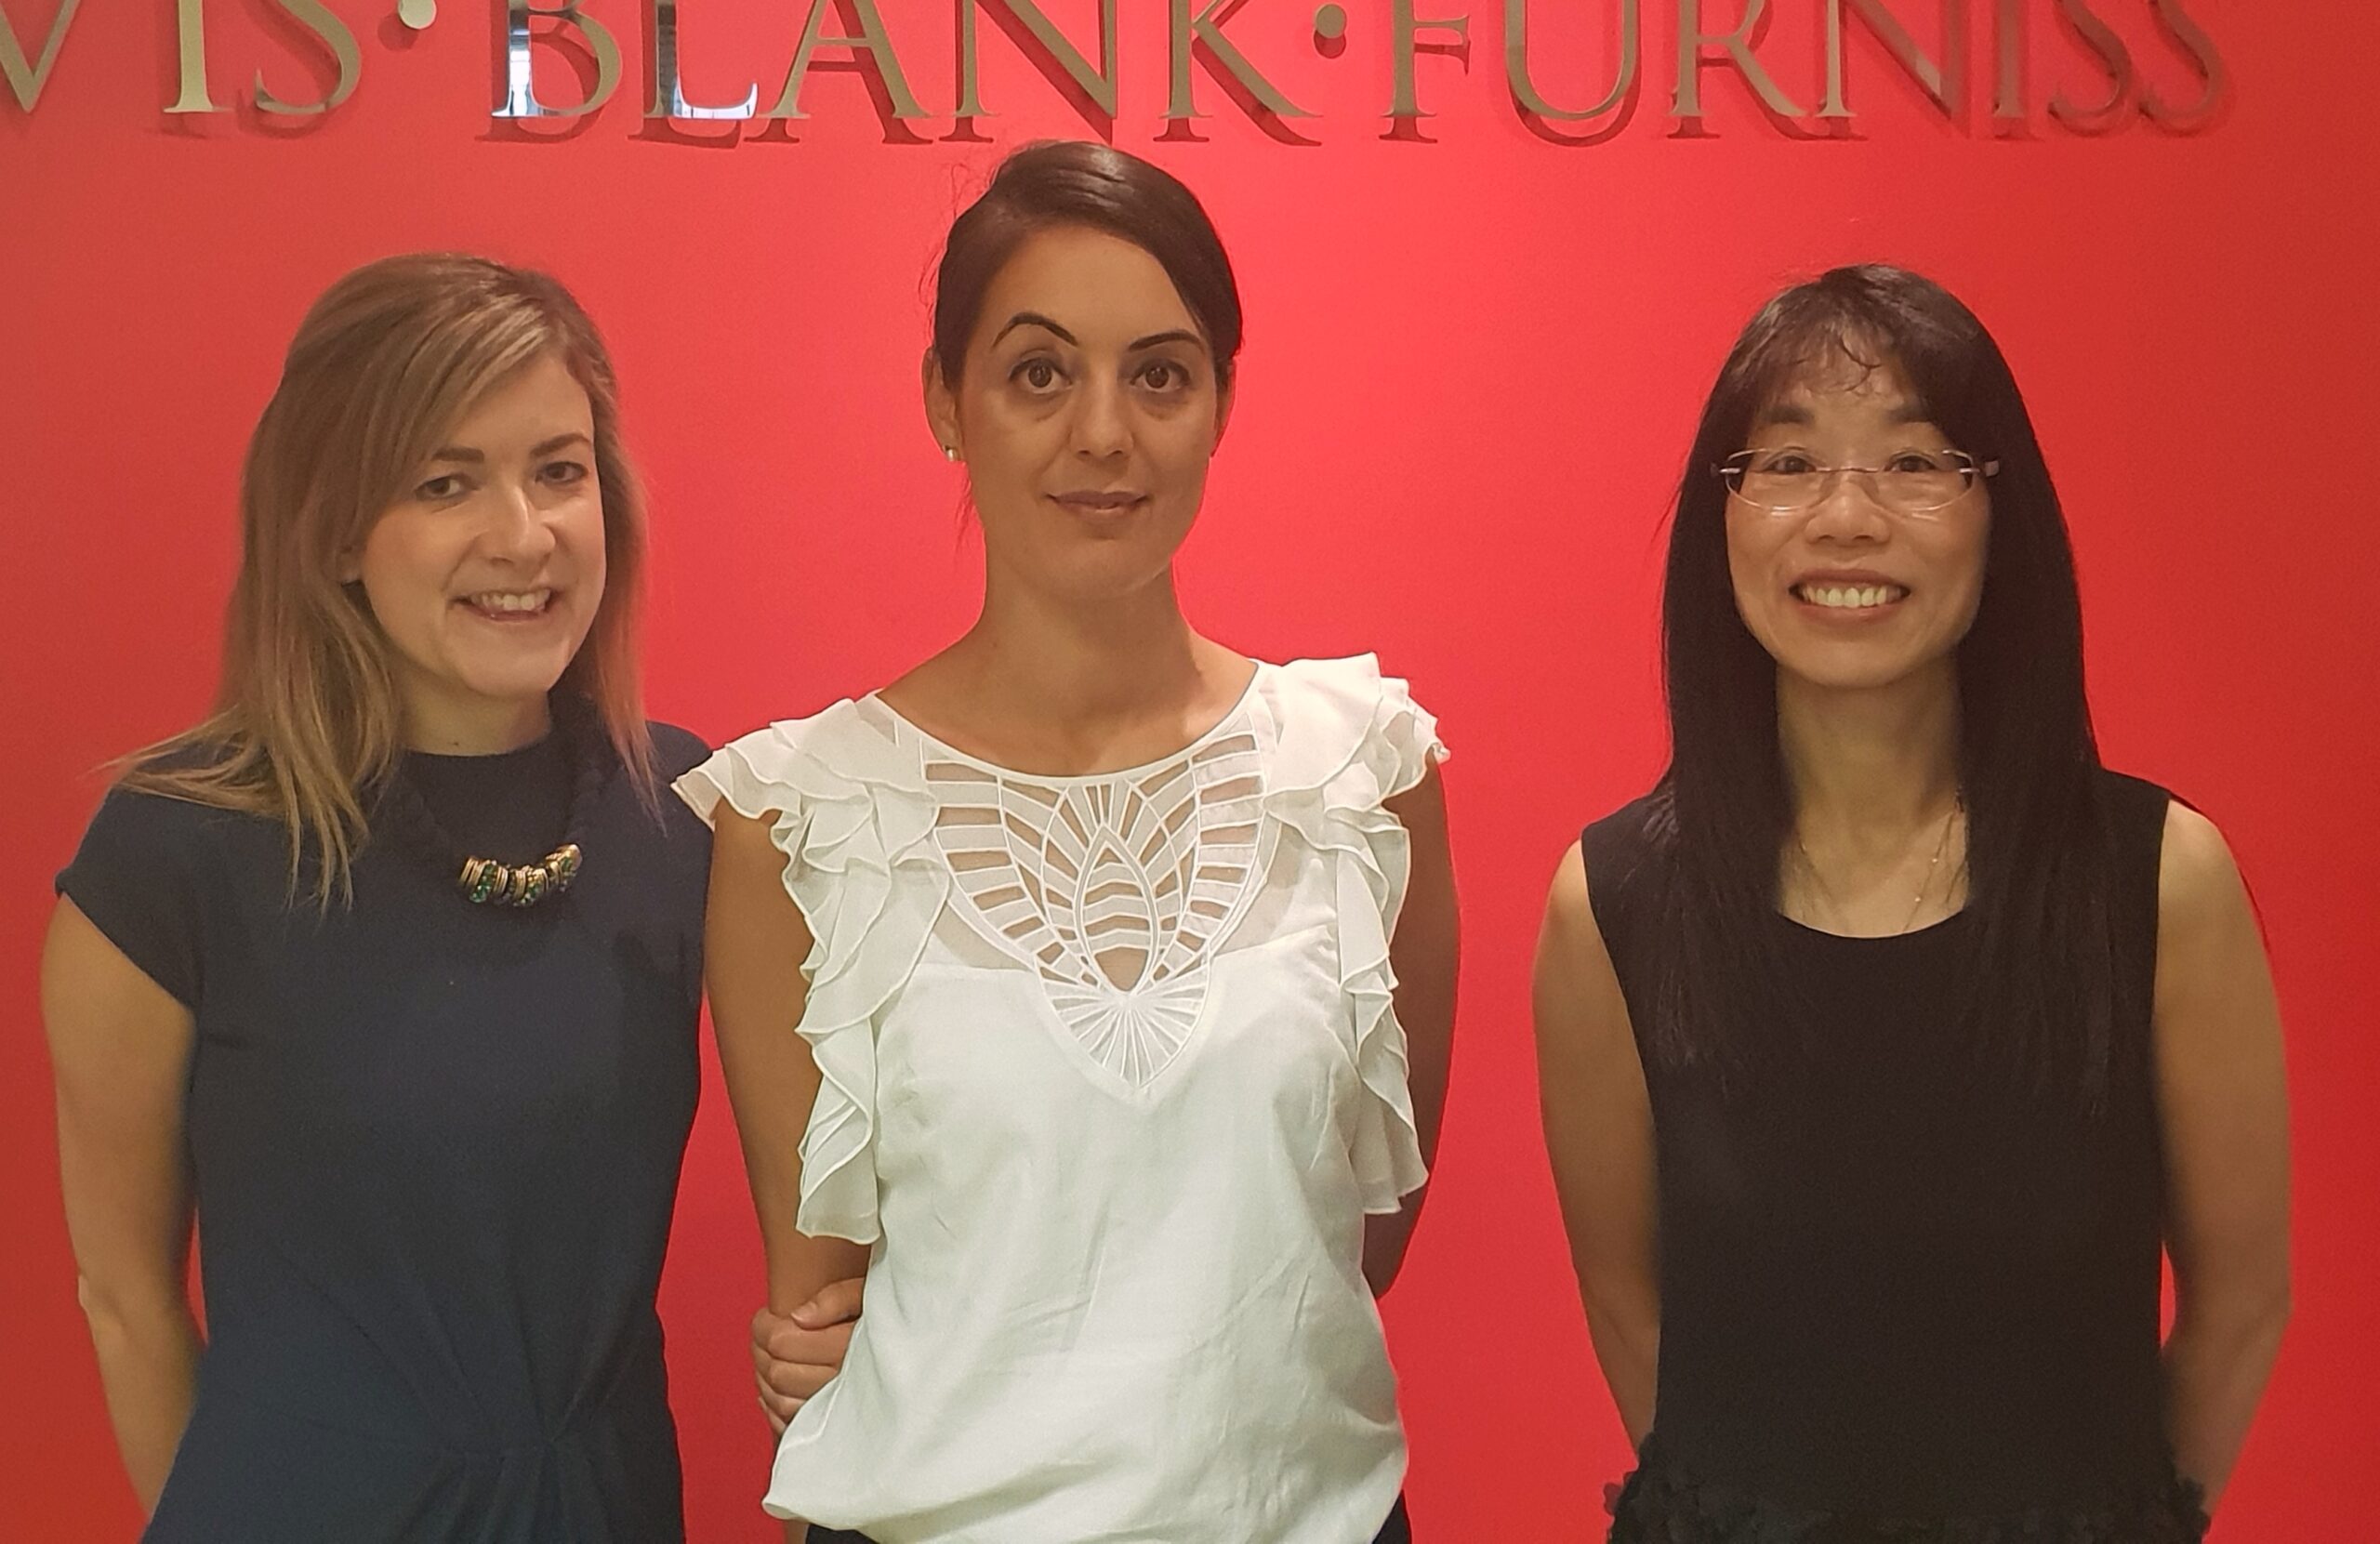 Suzanne Thompson, Katherine Darbinean and Amie Tsang, new appointments at Davis Blank Furniss